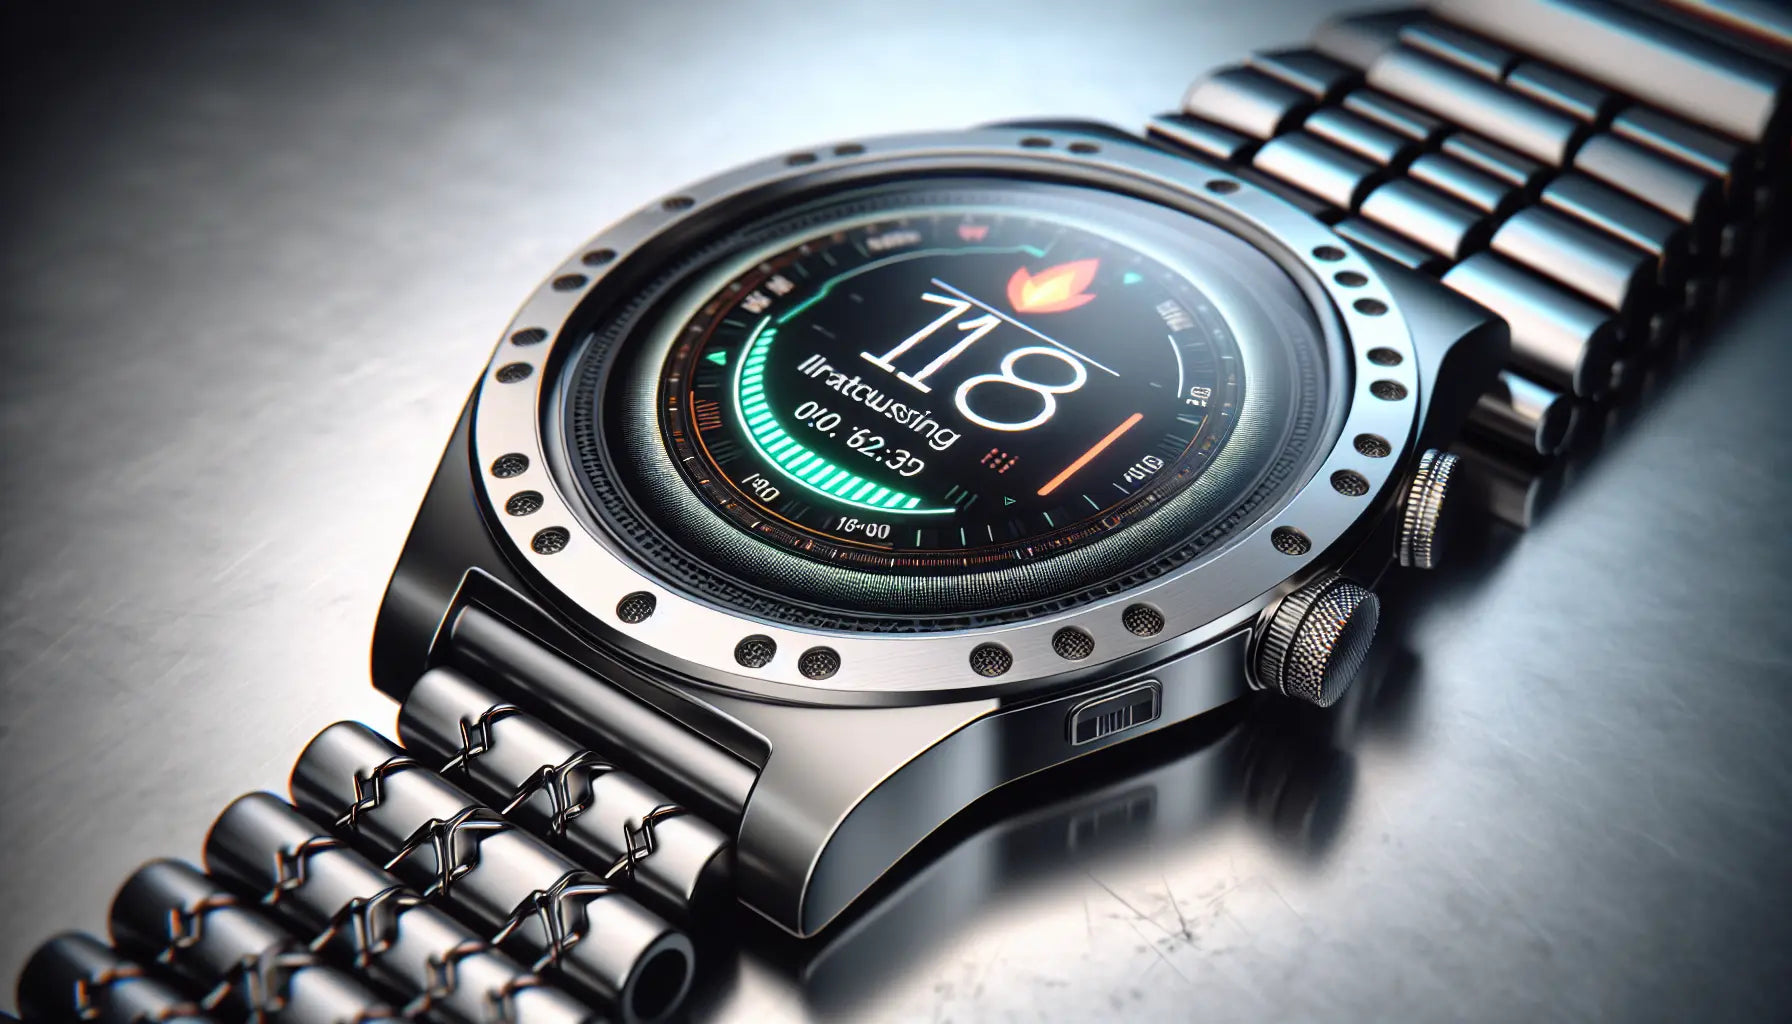 This Smartwatch Can Run BGMI!